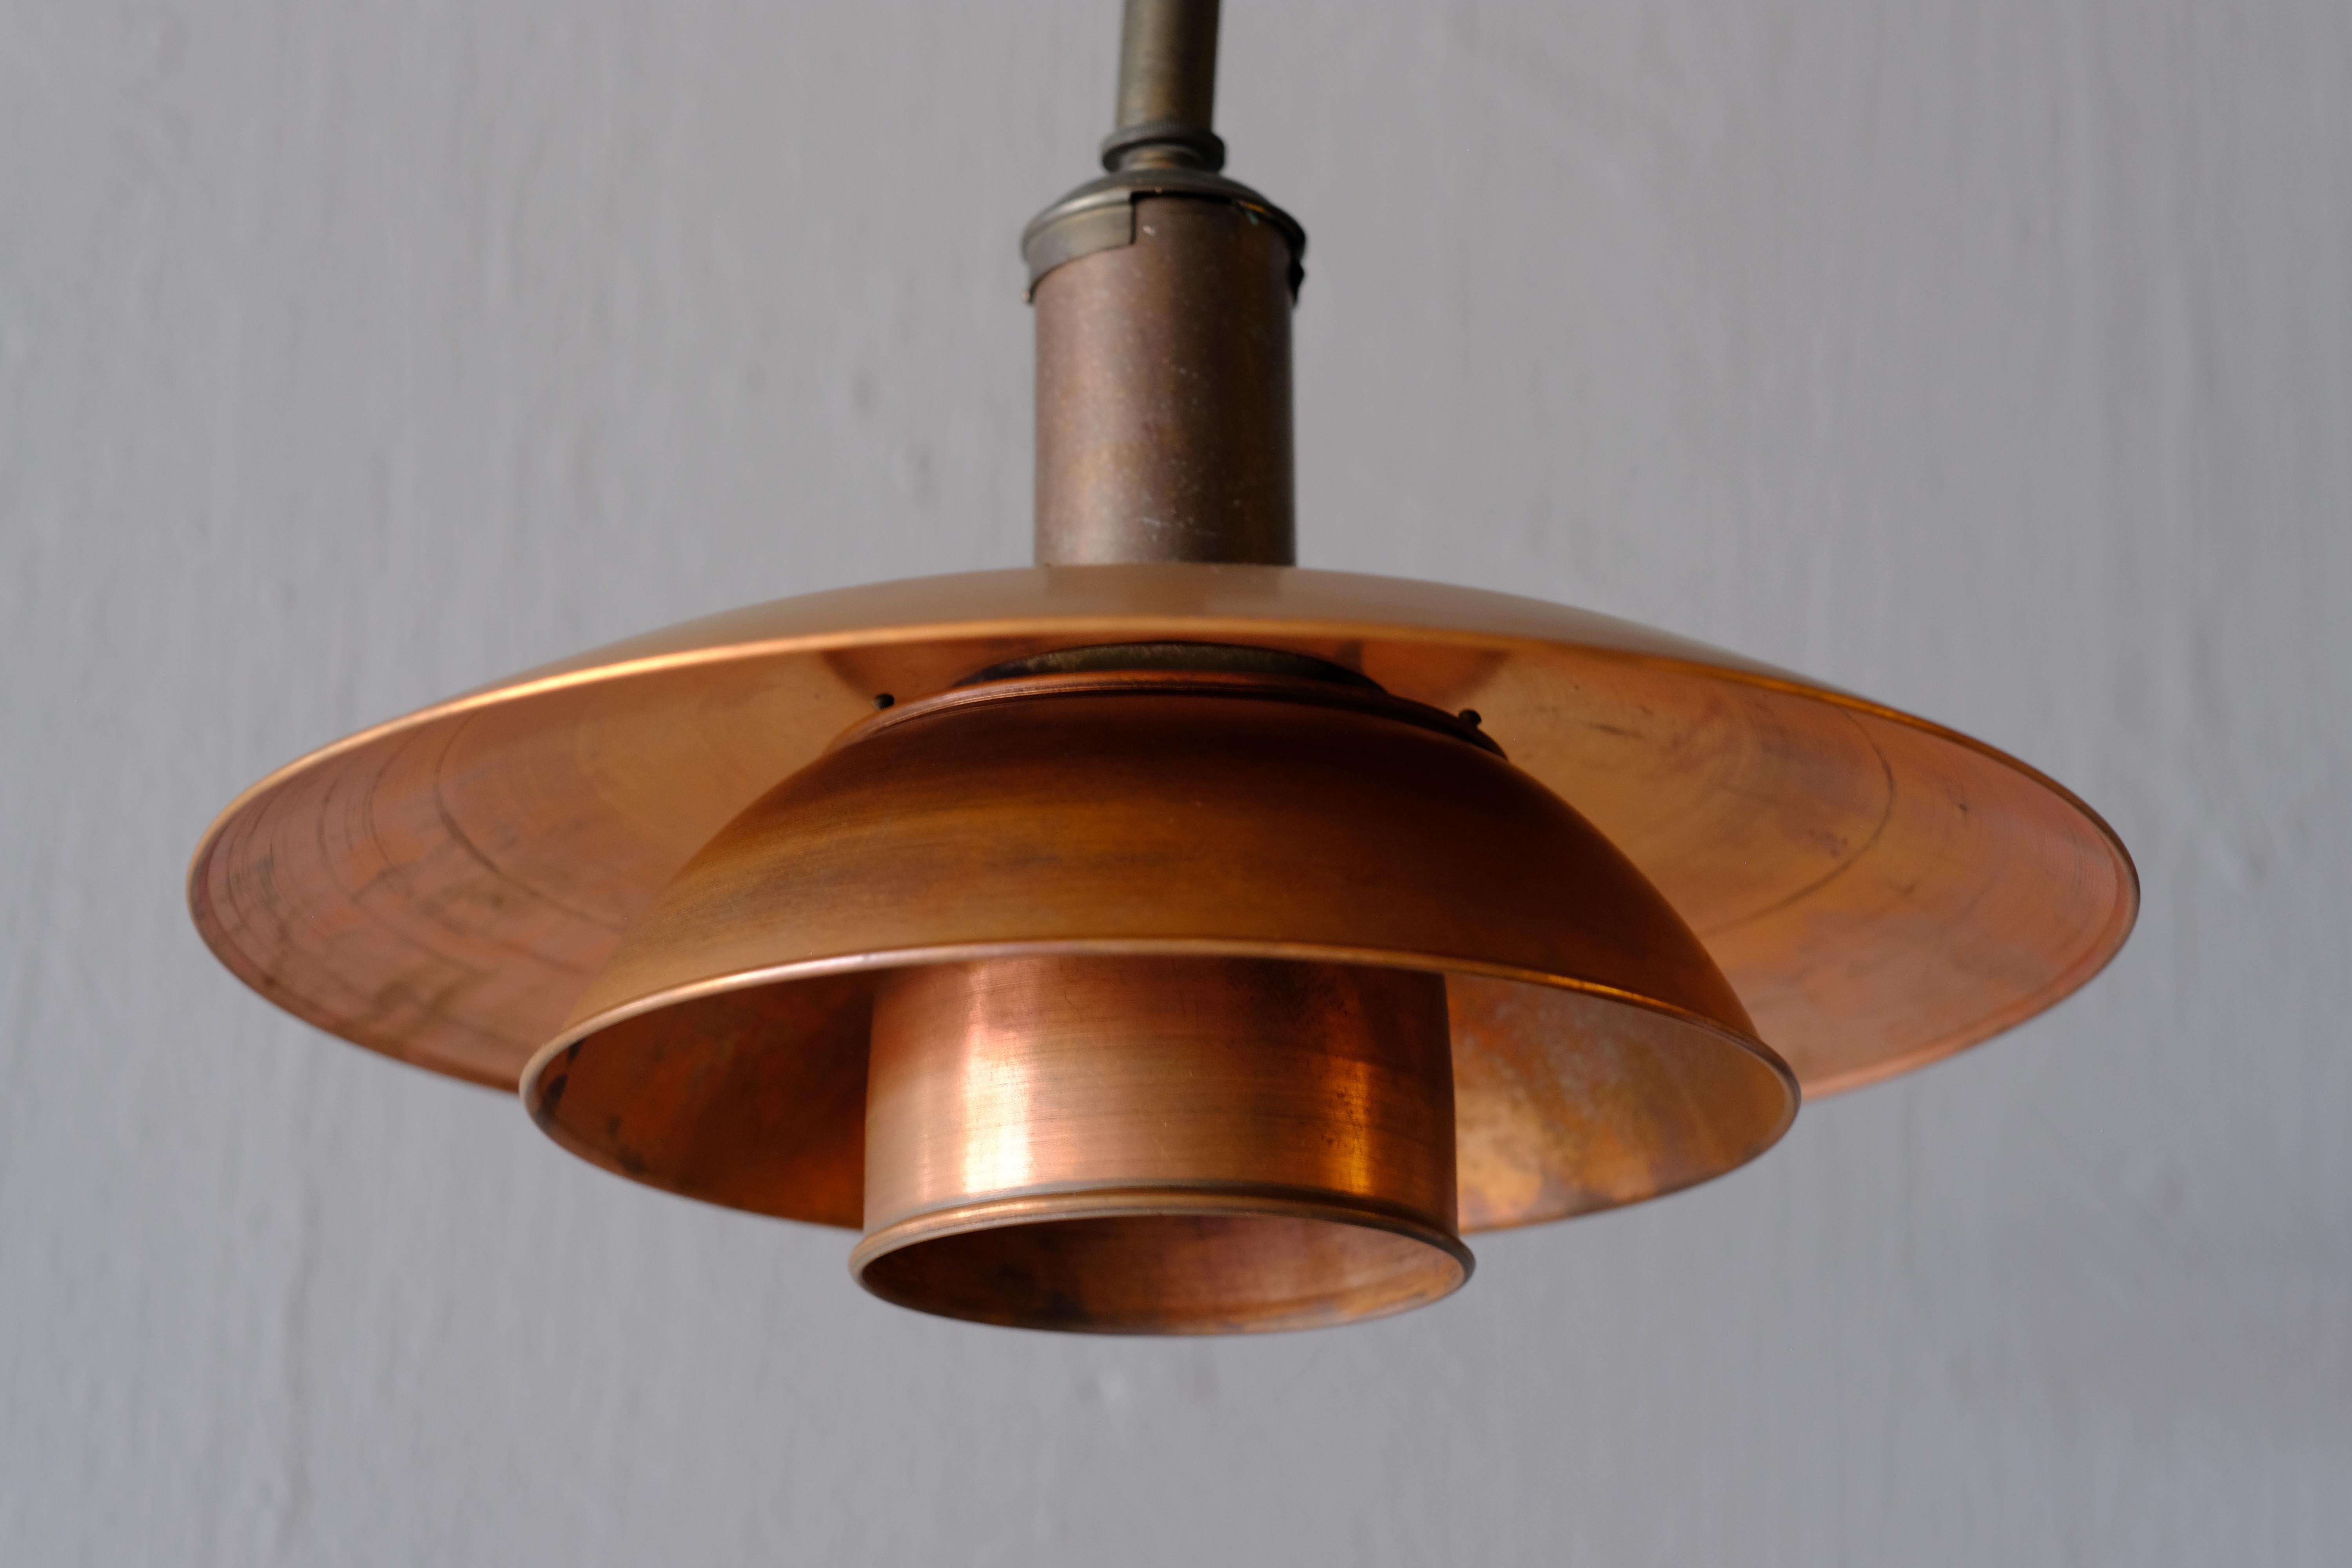 Very rare early “PH 4/3” pendant light by Poul Henningsen. It has wonderful patinated copper shades with a nickel plated socket cover with bayonet socket. The cast tripod shade holder is stamped “Patented”. Henningsen designed his iconic shade